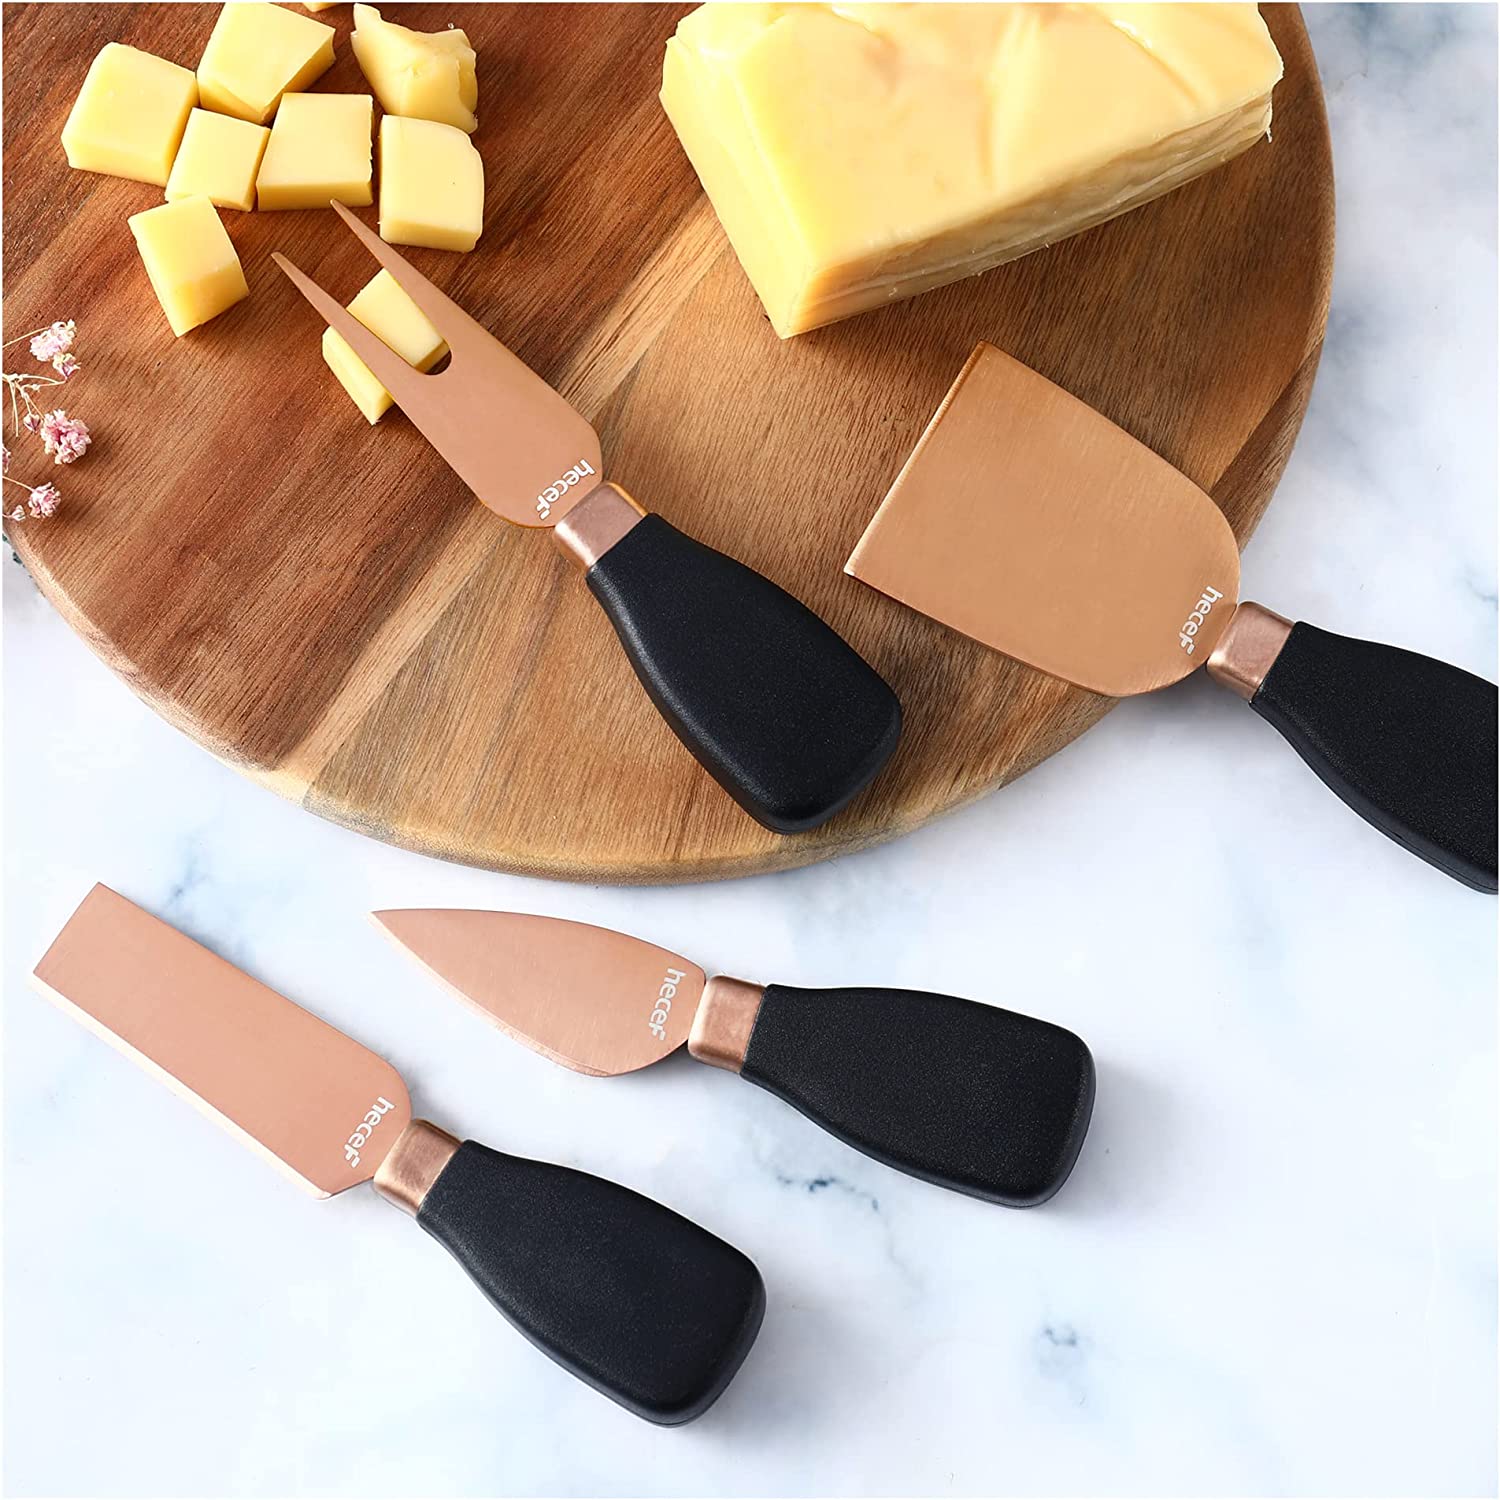 Hecef Kitchen Black Golden Cheese Knife Set of 5 with Acrylic Stand - Hecef Kitchen